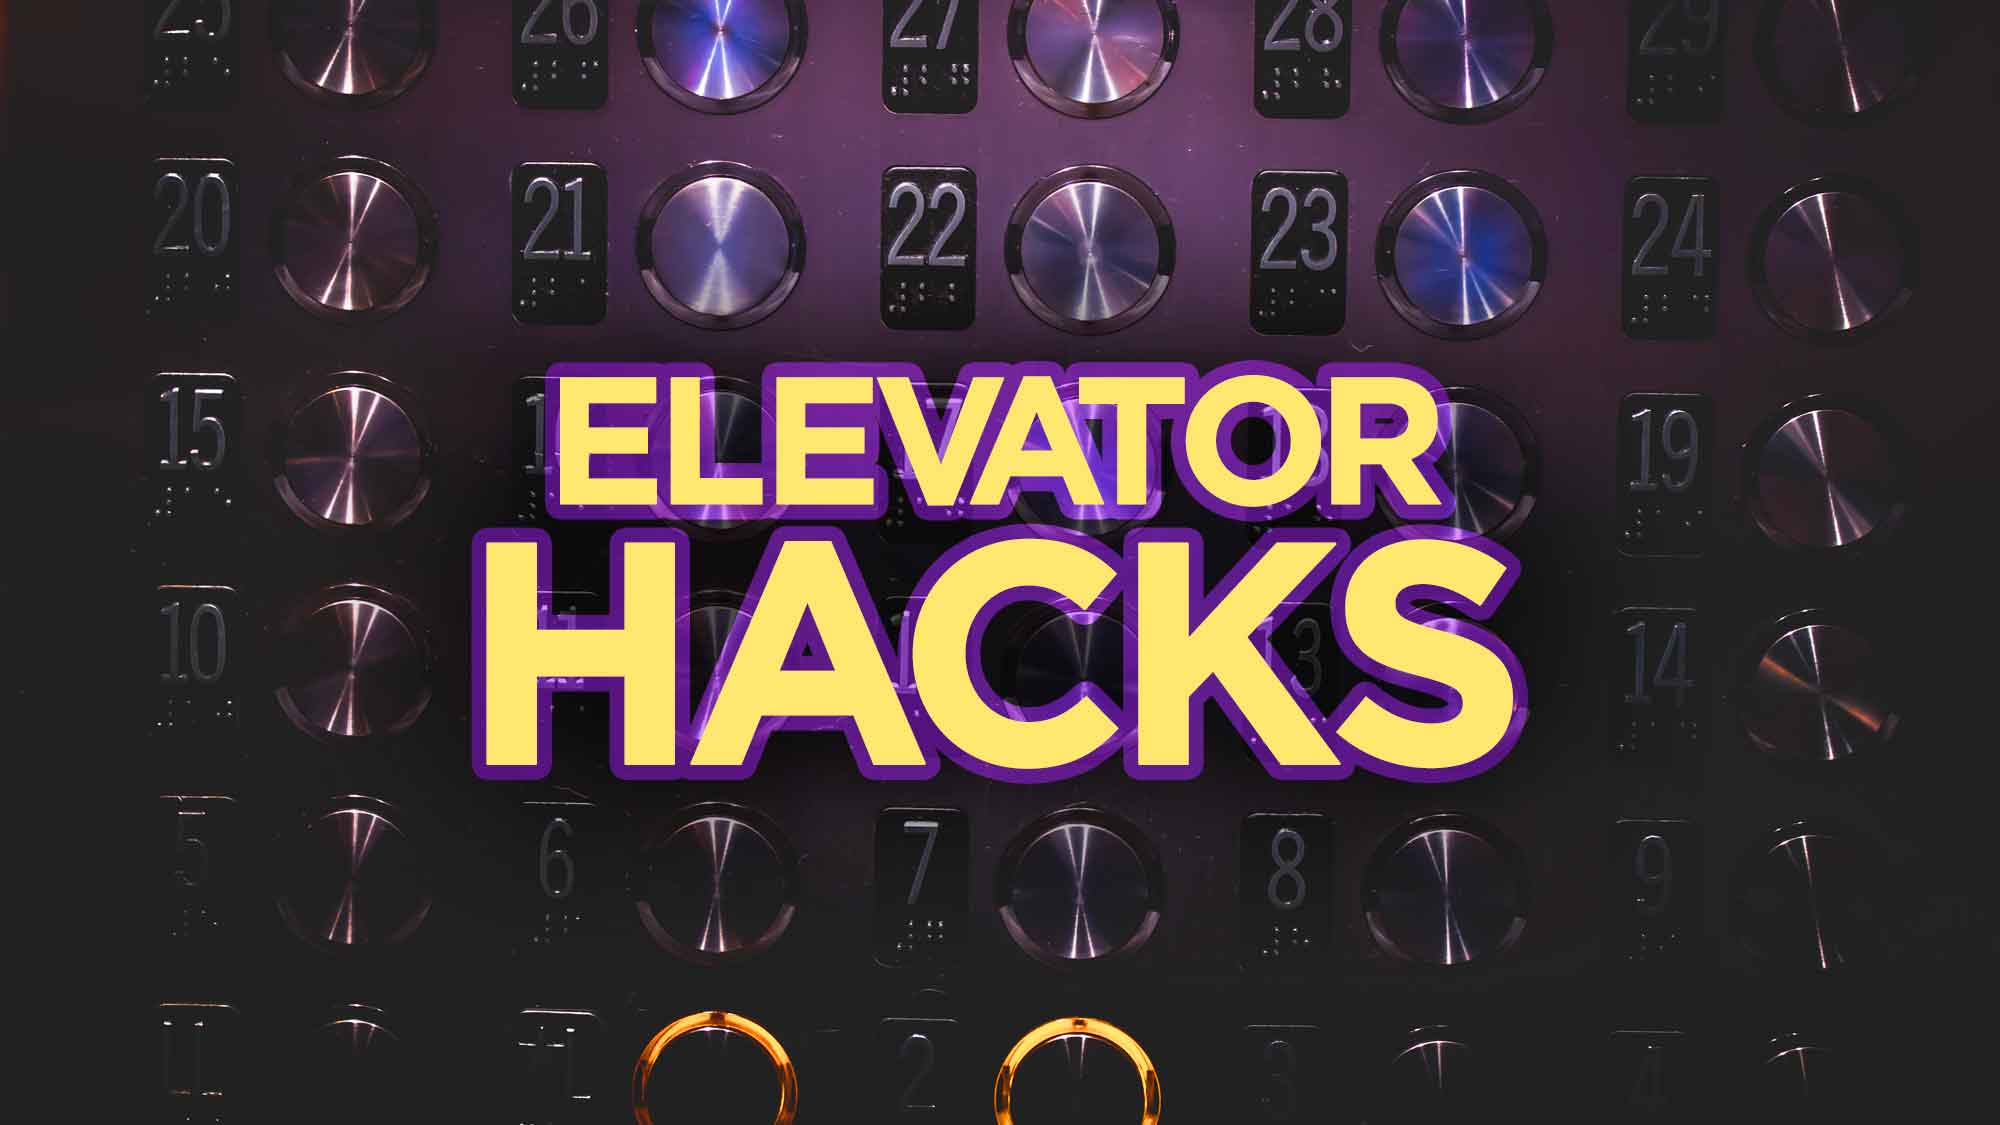 5 Easy Elevator Hacks That Will Help Give You An Express Ride